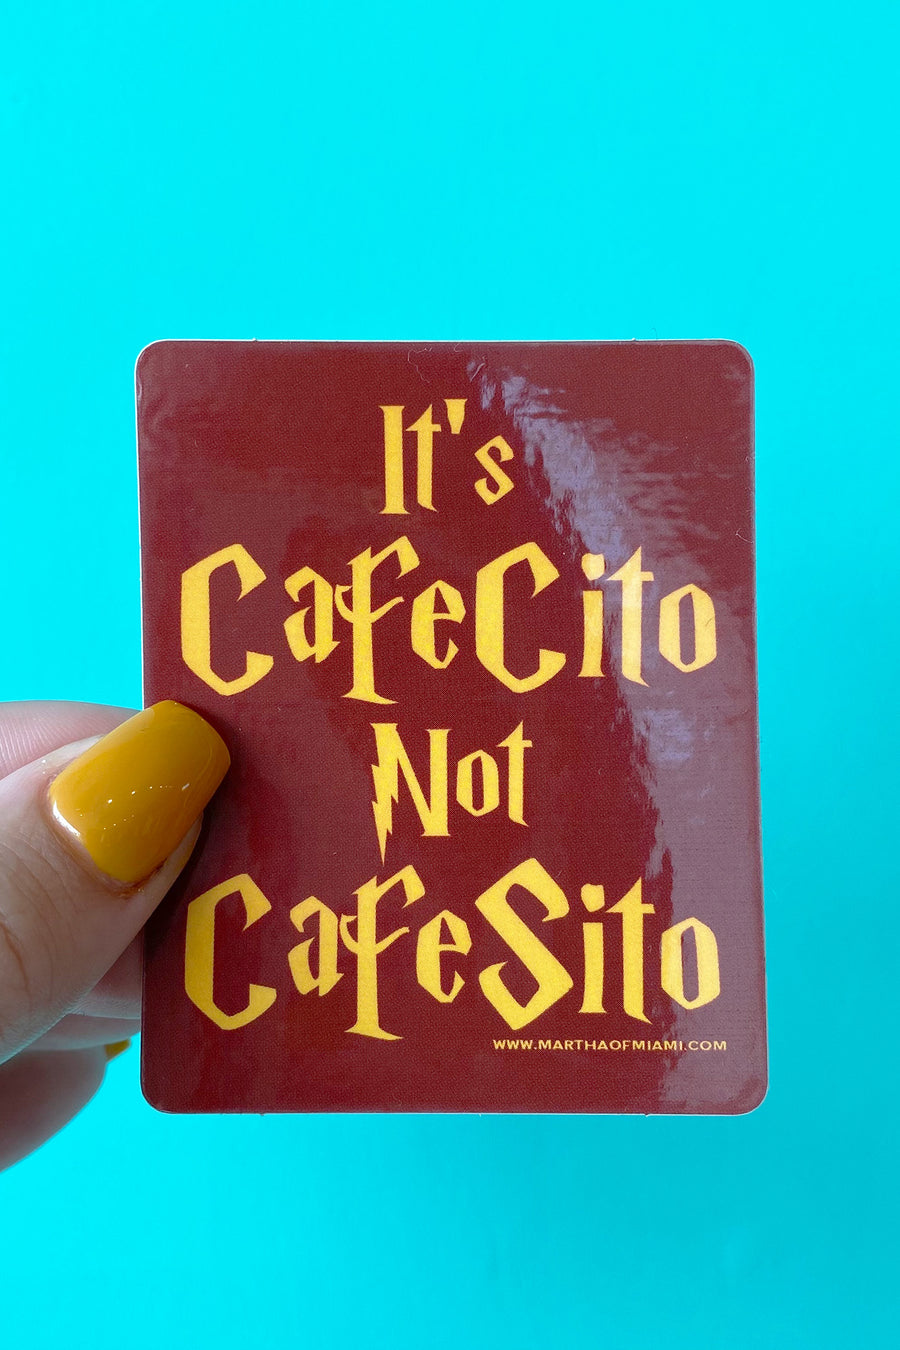 "It's Cafecito, Not Cafesito!" Pronunciation is important when it comes to this famous caffeinate spell!